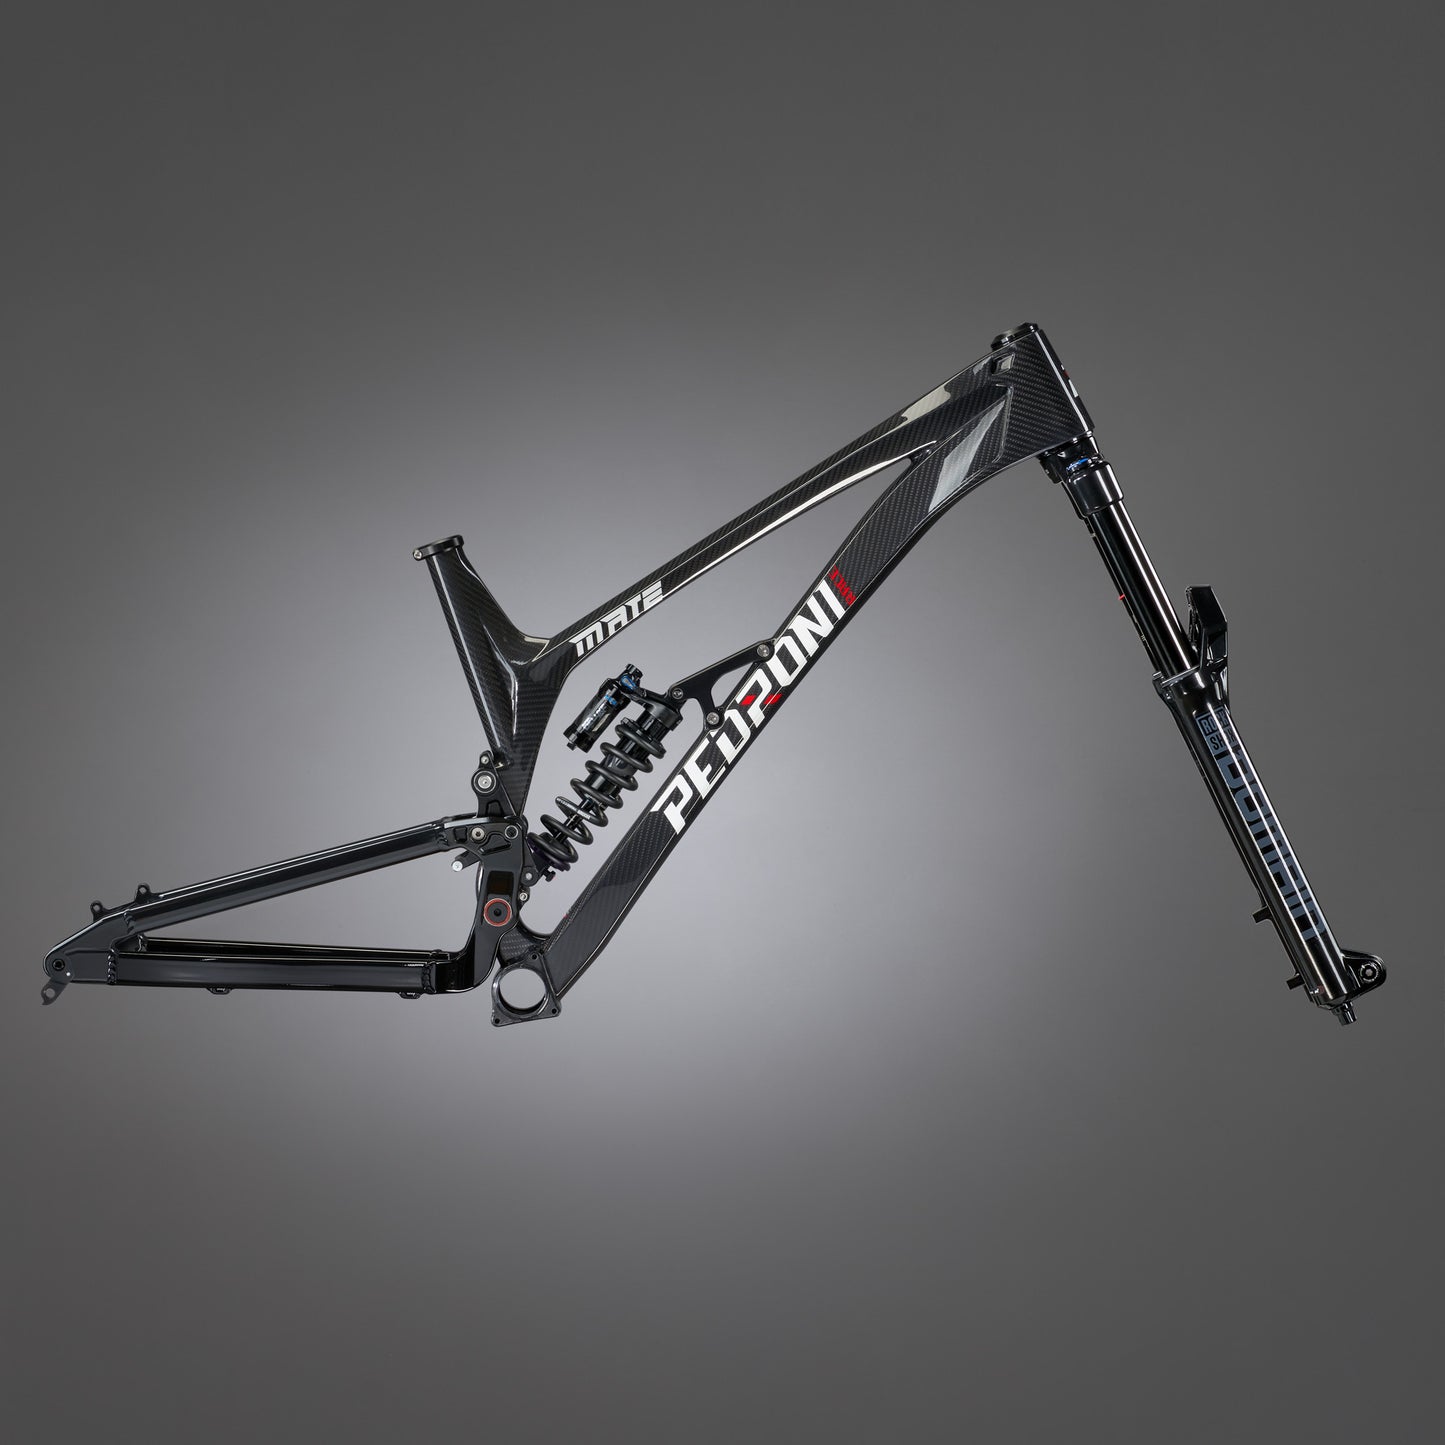 Mate Frameset with Rockshox Rear and Front Suspension